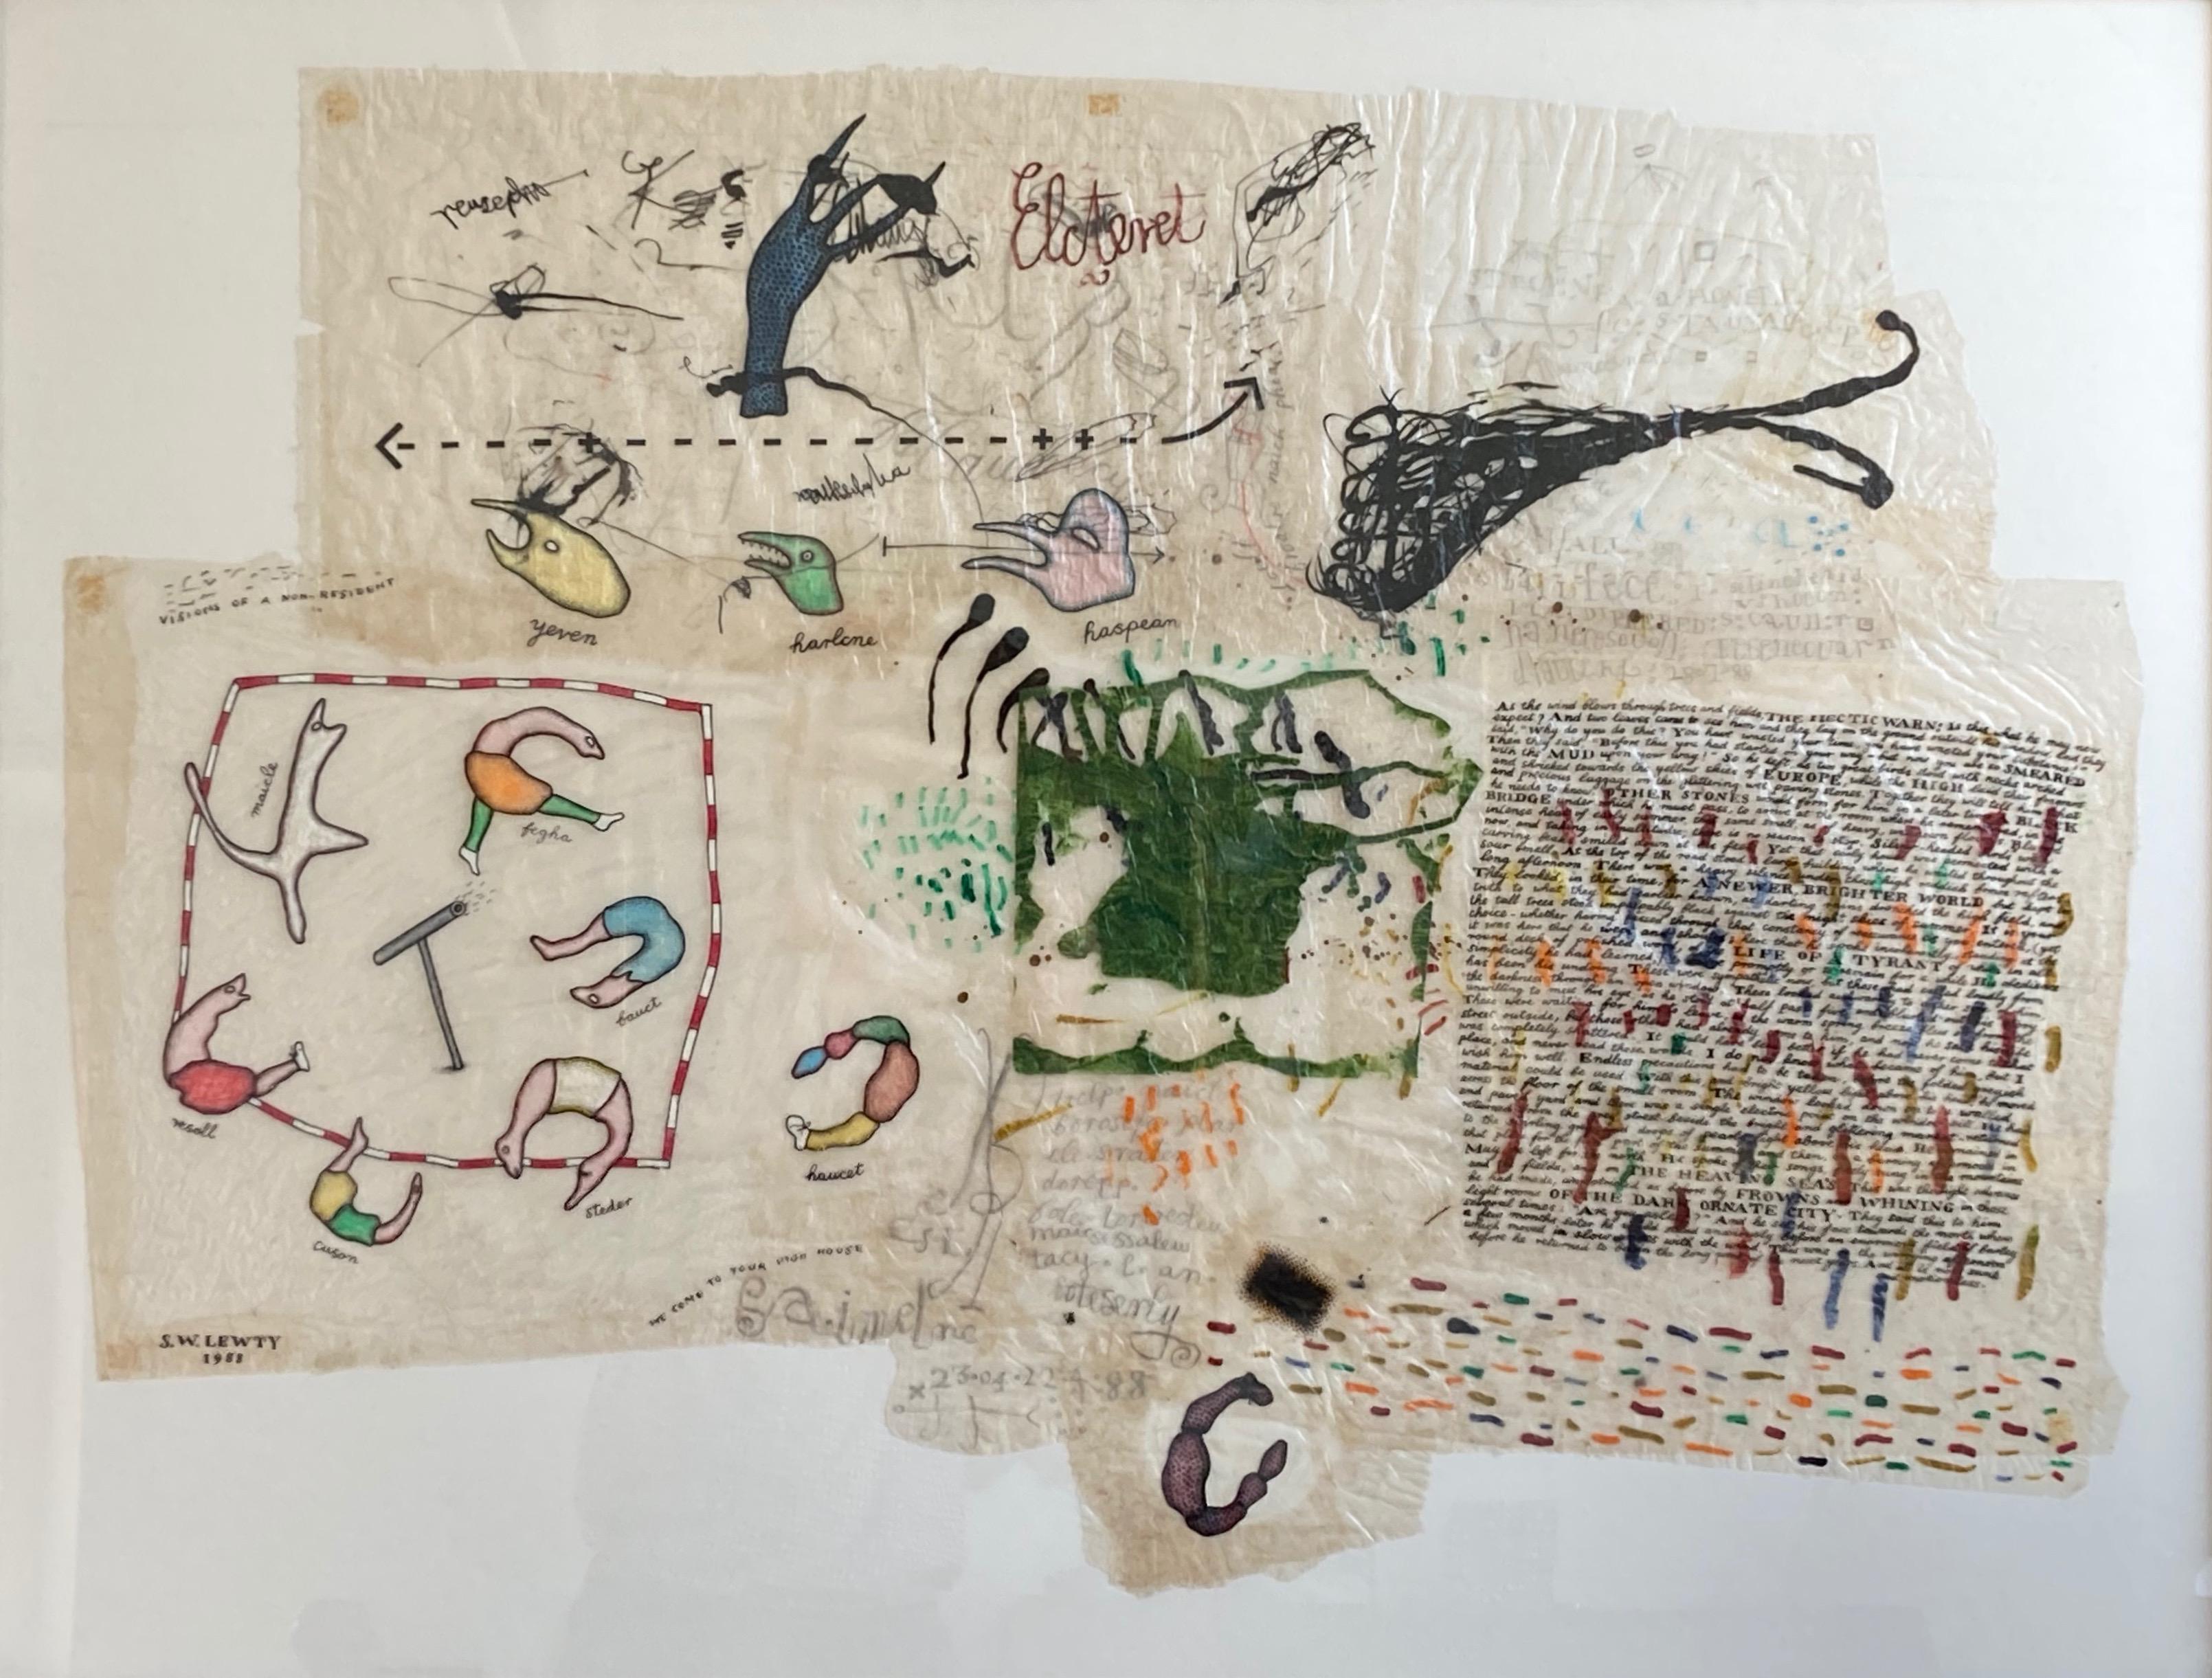 An extraordinary work from an extraordinary mind expressed through unique imagery, poetry and calligraphy.

Simon Lewty (1941-2021)
Visions of a non-resident
Signed and dated 1988 and titled verso
Ink, crayon and acrylic on tissue paper
31½ x 41½